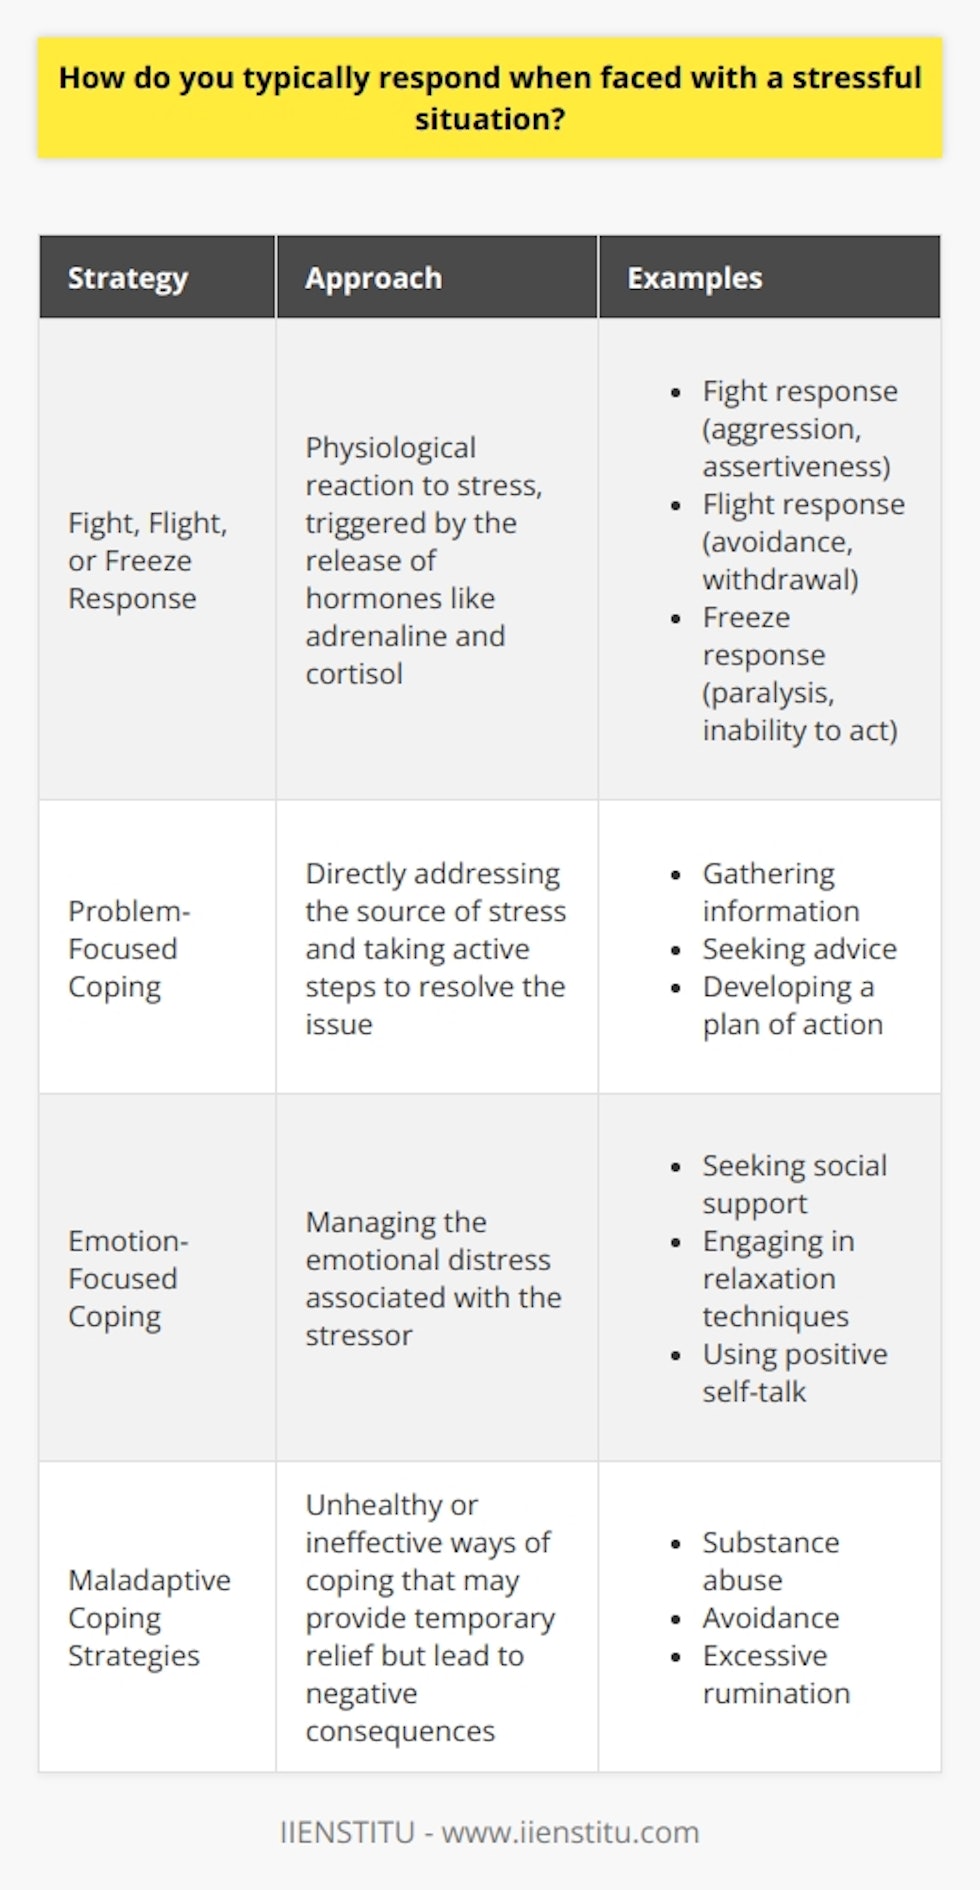 When faced with a stressful situation, individuals often respond in various ways depending on their personality, experiences, and coping mechanisms. Some people may react emotionally, experiencing feelings of anxiety, frustration, or even anger. Others might approach the situation more analytically, trying to identify the source of the stress and develop a plan to address it. In many cases, a combination of emotional and rational responses is employed to navigate the challenging circumstances. Fight, Flight, or Freeze Response One of the most common physiological reactions to stress is the activation of the fight, flight, or freeze response. This instinctive response is triggered by the release of hormones such as adrenaline and cortisol, preparing the body to either confront the stressor, escape from it, or become immobilized. The fight response may manifest as aggression or assertiveness, while the flight response can lead to avoidance or withdrawal. The freeze response, on the other hand, may cause a person to feel paralyzed or unable to take action. Problem-Focused Coping Some individuals respond to stressful situations by adopting a problem-focused coping strategy. This approach involves directly addressing the source of the stress and taking active steps to resolve the issue. Problem-focused coping may include gathering information, seeking advice, or developing a plan of action. By focusing on finding a solution, individuals can regain a sense of control and reduce the emotional impact of the stressor. Examples of Problem-Focused Coping    Emotion-Focused Coping In some cases, individuals may rely on emotion-focused coping strategies when faced with stress. This approach involves managing the emotional distress associated with the stressor rather than directly addressing the problem itself. Emotion-focused coping may include seeking social support, engaging in relaxation techniques, or using positive self-talk. By regulating their emotional response, individuals can reduce the psychological impact of the stressor and maintain a sense of well-being. Examples of Emotion-Focused Coping    Maladaptive Coping Strategies While problem-focused and emotion-focused coping strategies can be effective, some individuals may resort to maladaptive coping mechanisms when faced with stress. These strategies may provide temporary relief but can ultimately exacerbate the problem or lead to negative consequences. Examples of maladaptive coping include substance abuse, avoidance, or excessive rumination. It is essential to recognize these unhealthy patterns and seek support in developing more constructive coping skills. Building Resilience Ultimately, the way an individual responds to stressful situations can have a significant impact on their overall well-being and ability to navigate challenges. By developing a repertoire of healthy coping strategies and building resilience, individuals can better manage stress and maintain a sense of equilibrium in the face of adversity. This may involve a combination of problem-focused and emotion-focused approaches, as well as seeking support from others and engaging in self-care practices.